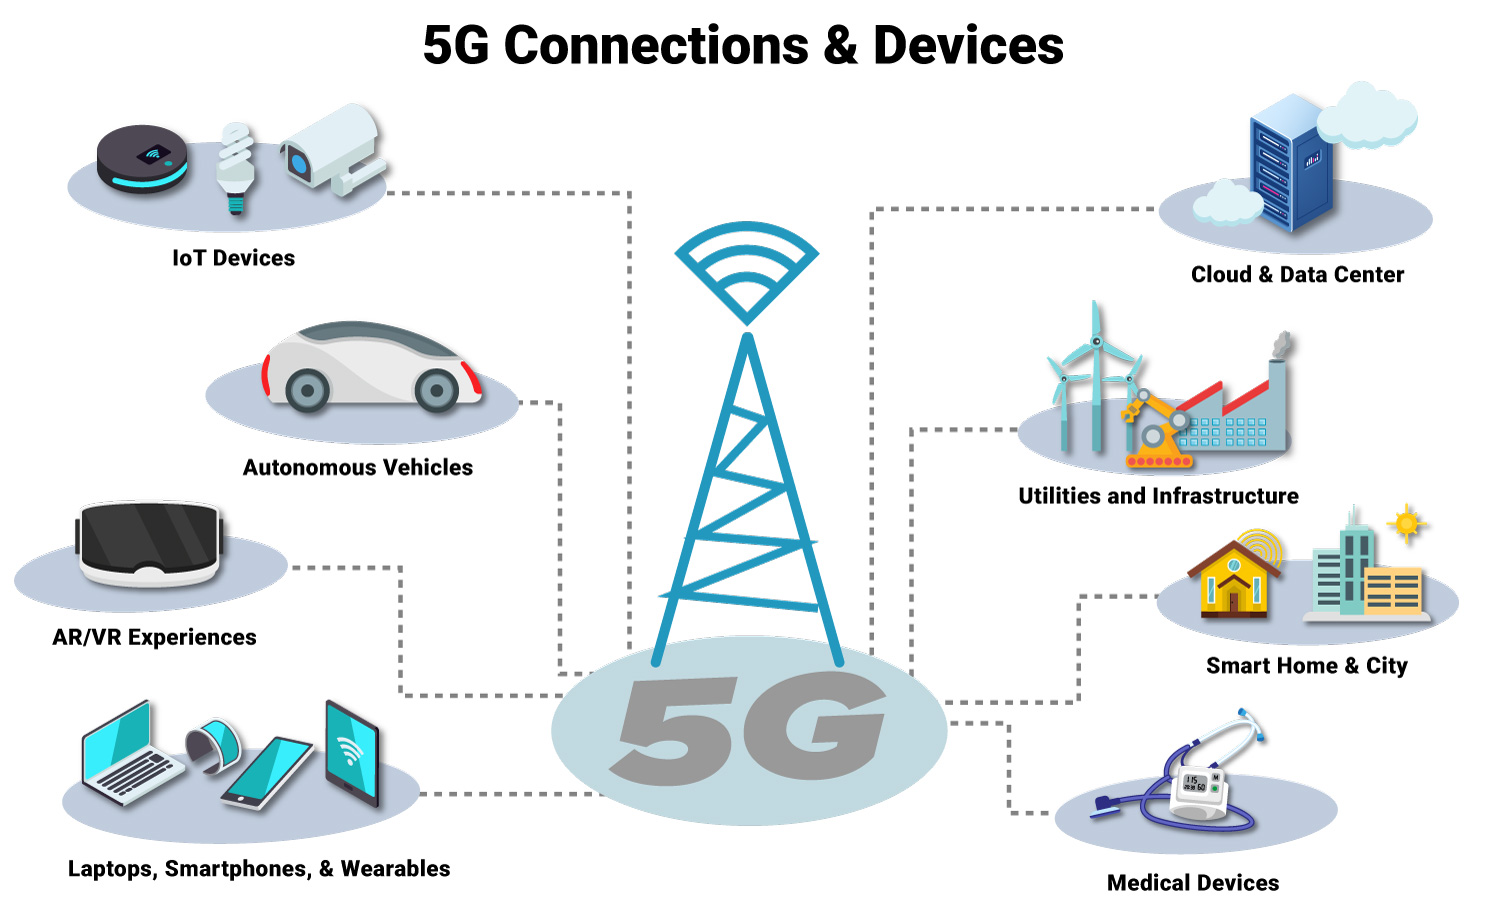 5G impacts many aspects of design and manufacturing, including PCB assembly, PCB Fabrication, PCBA manufacturing